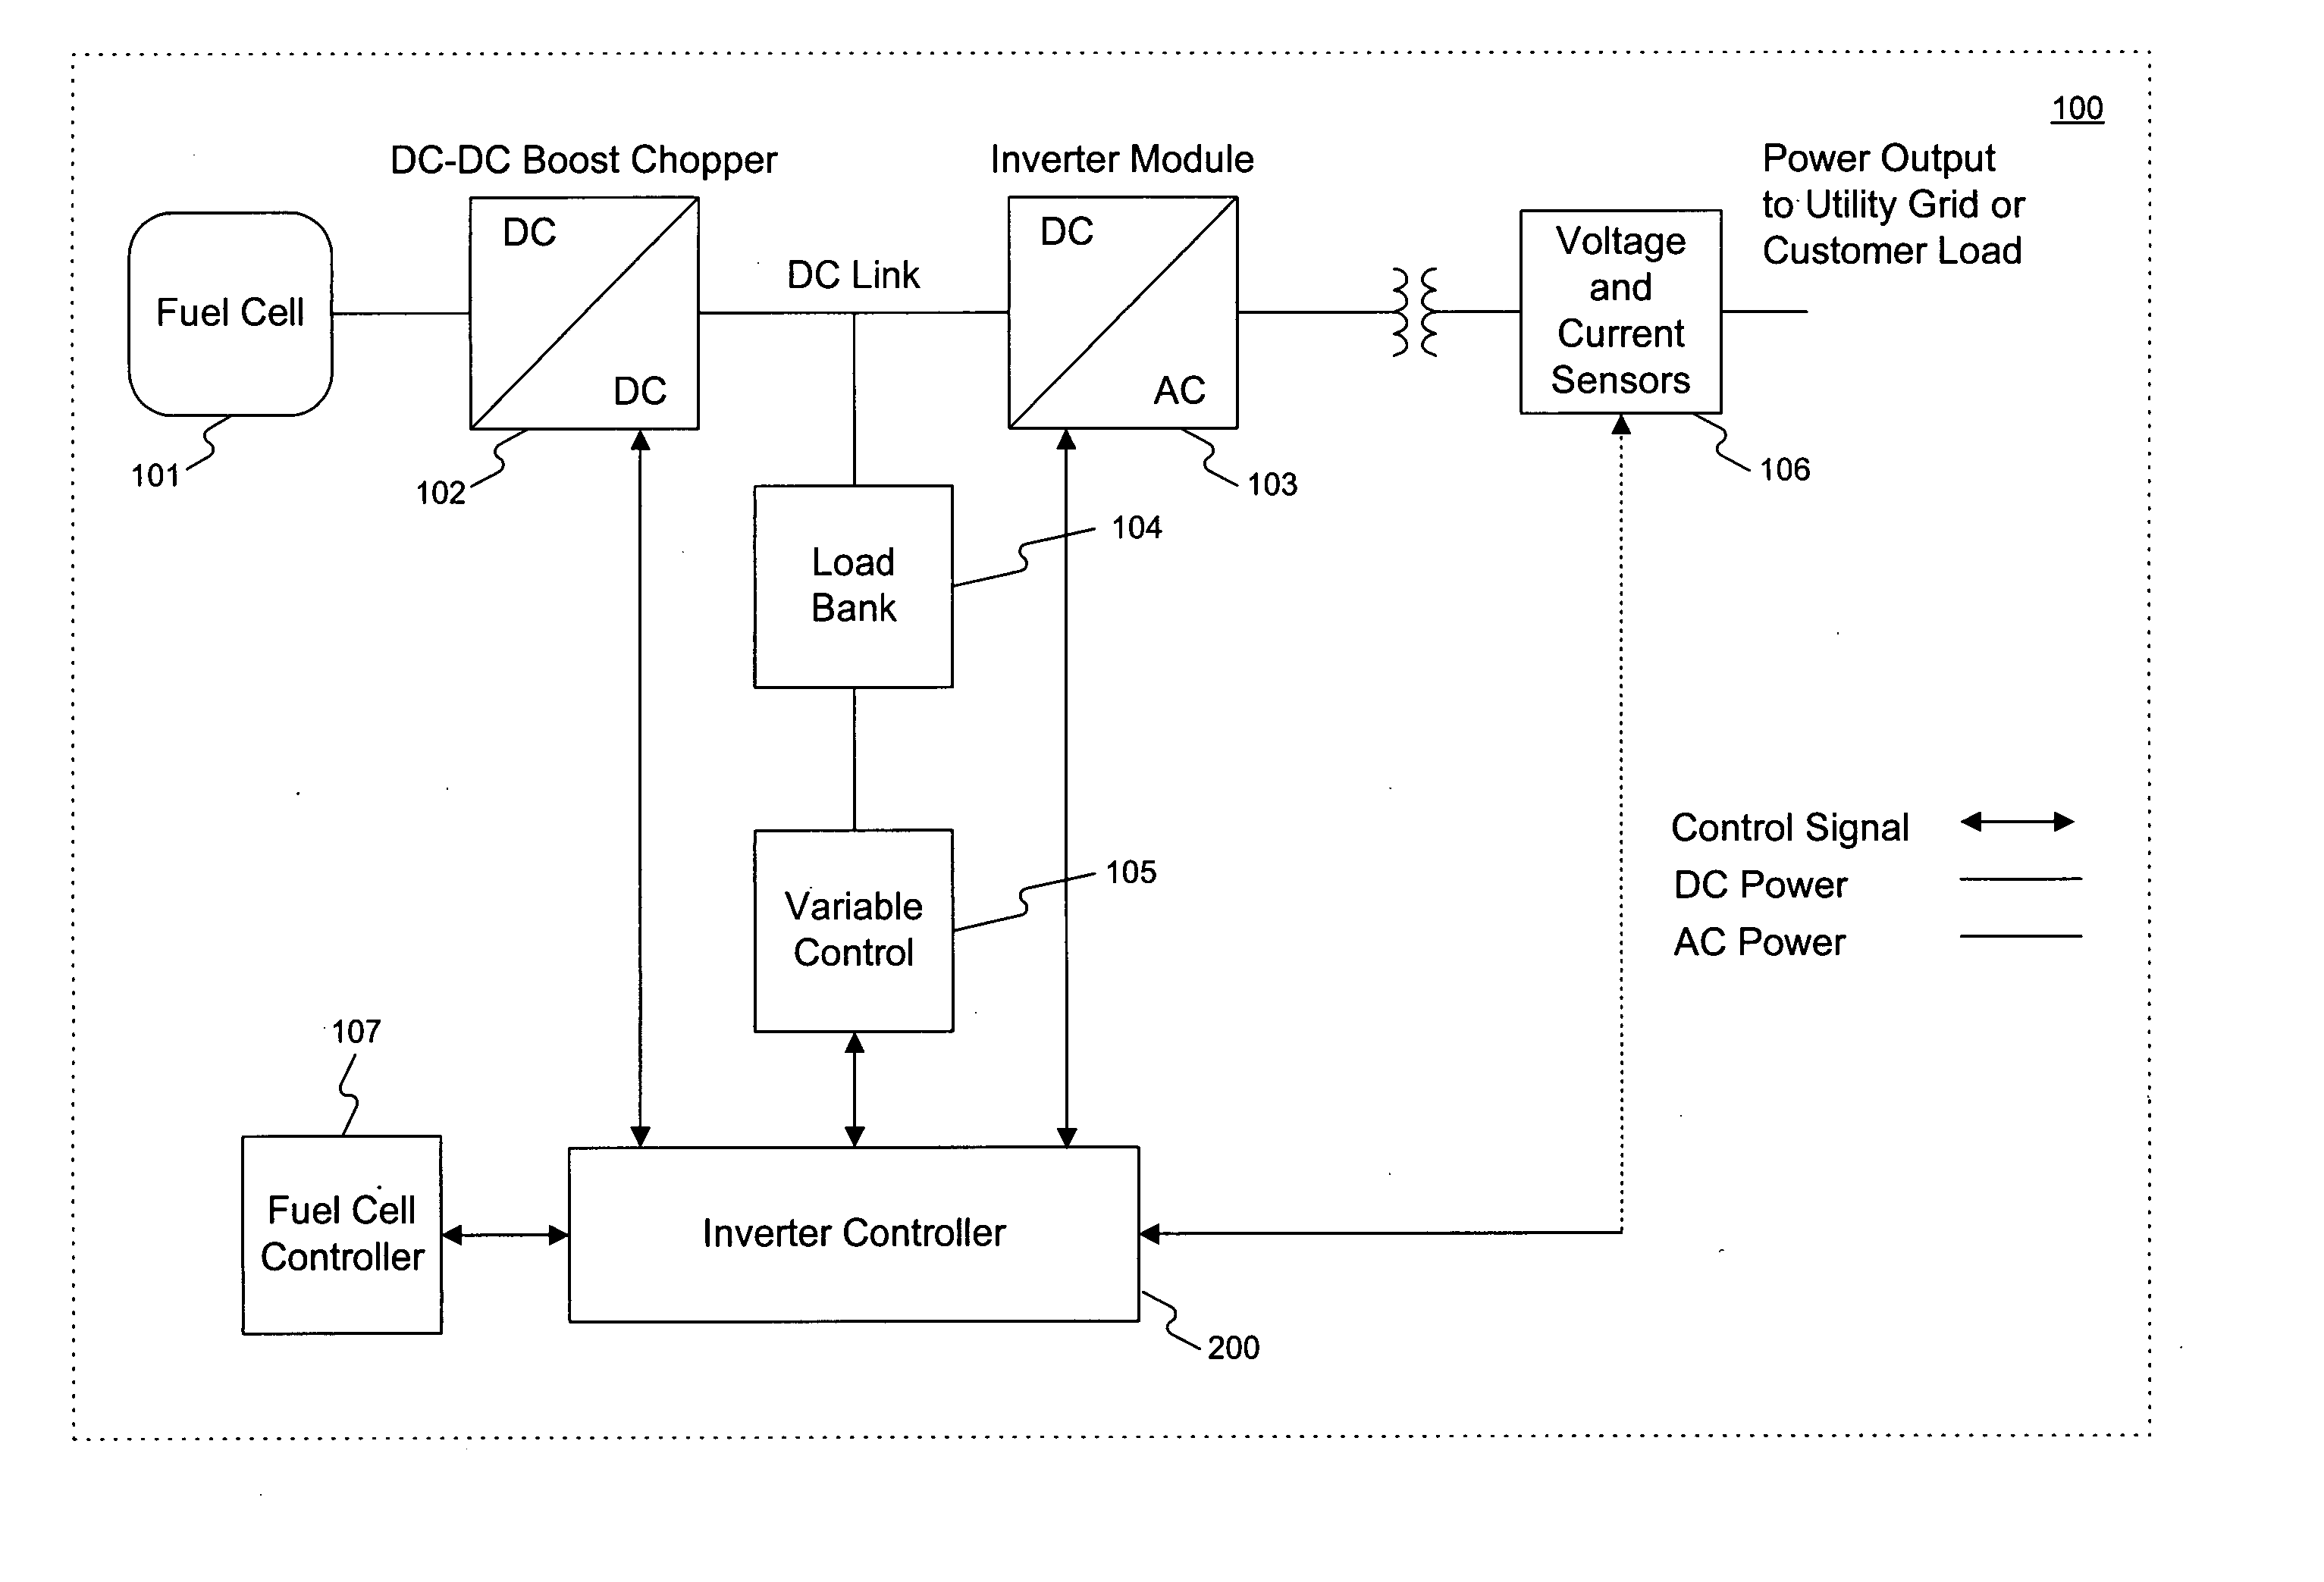 System for fuel cell power plant load following and power regulation